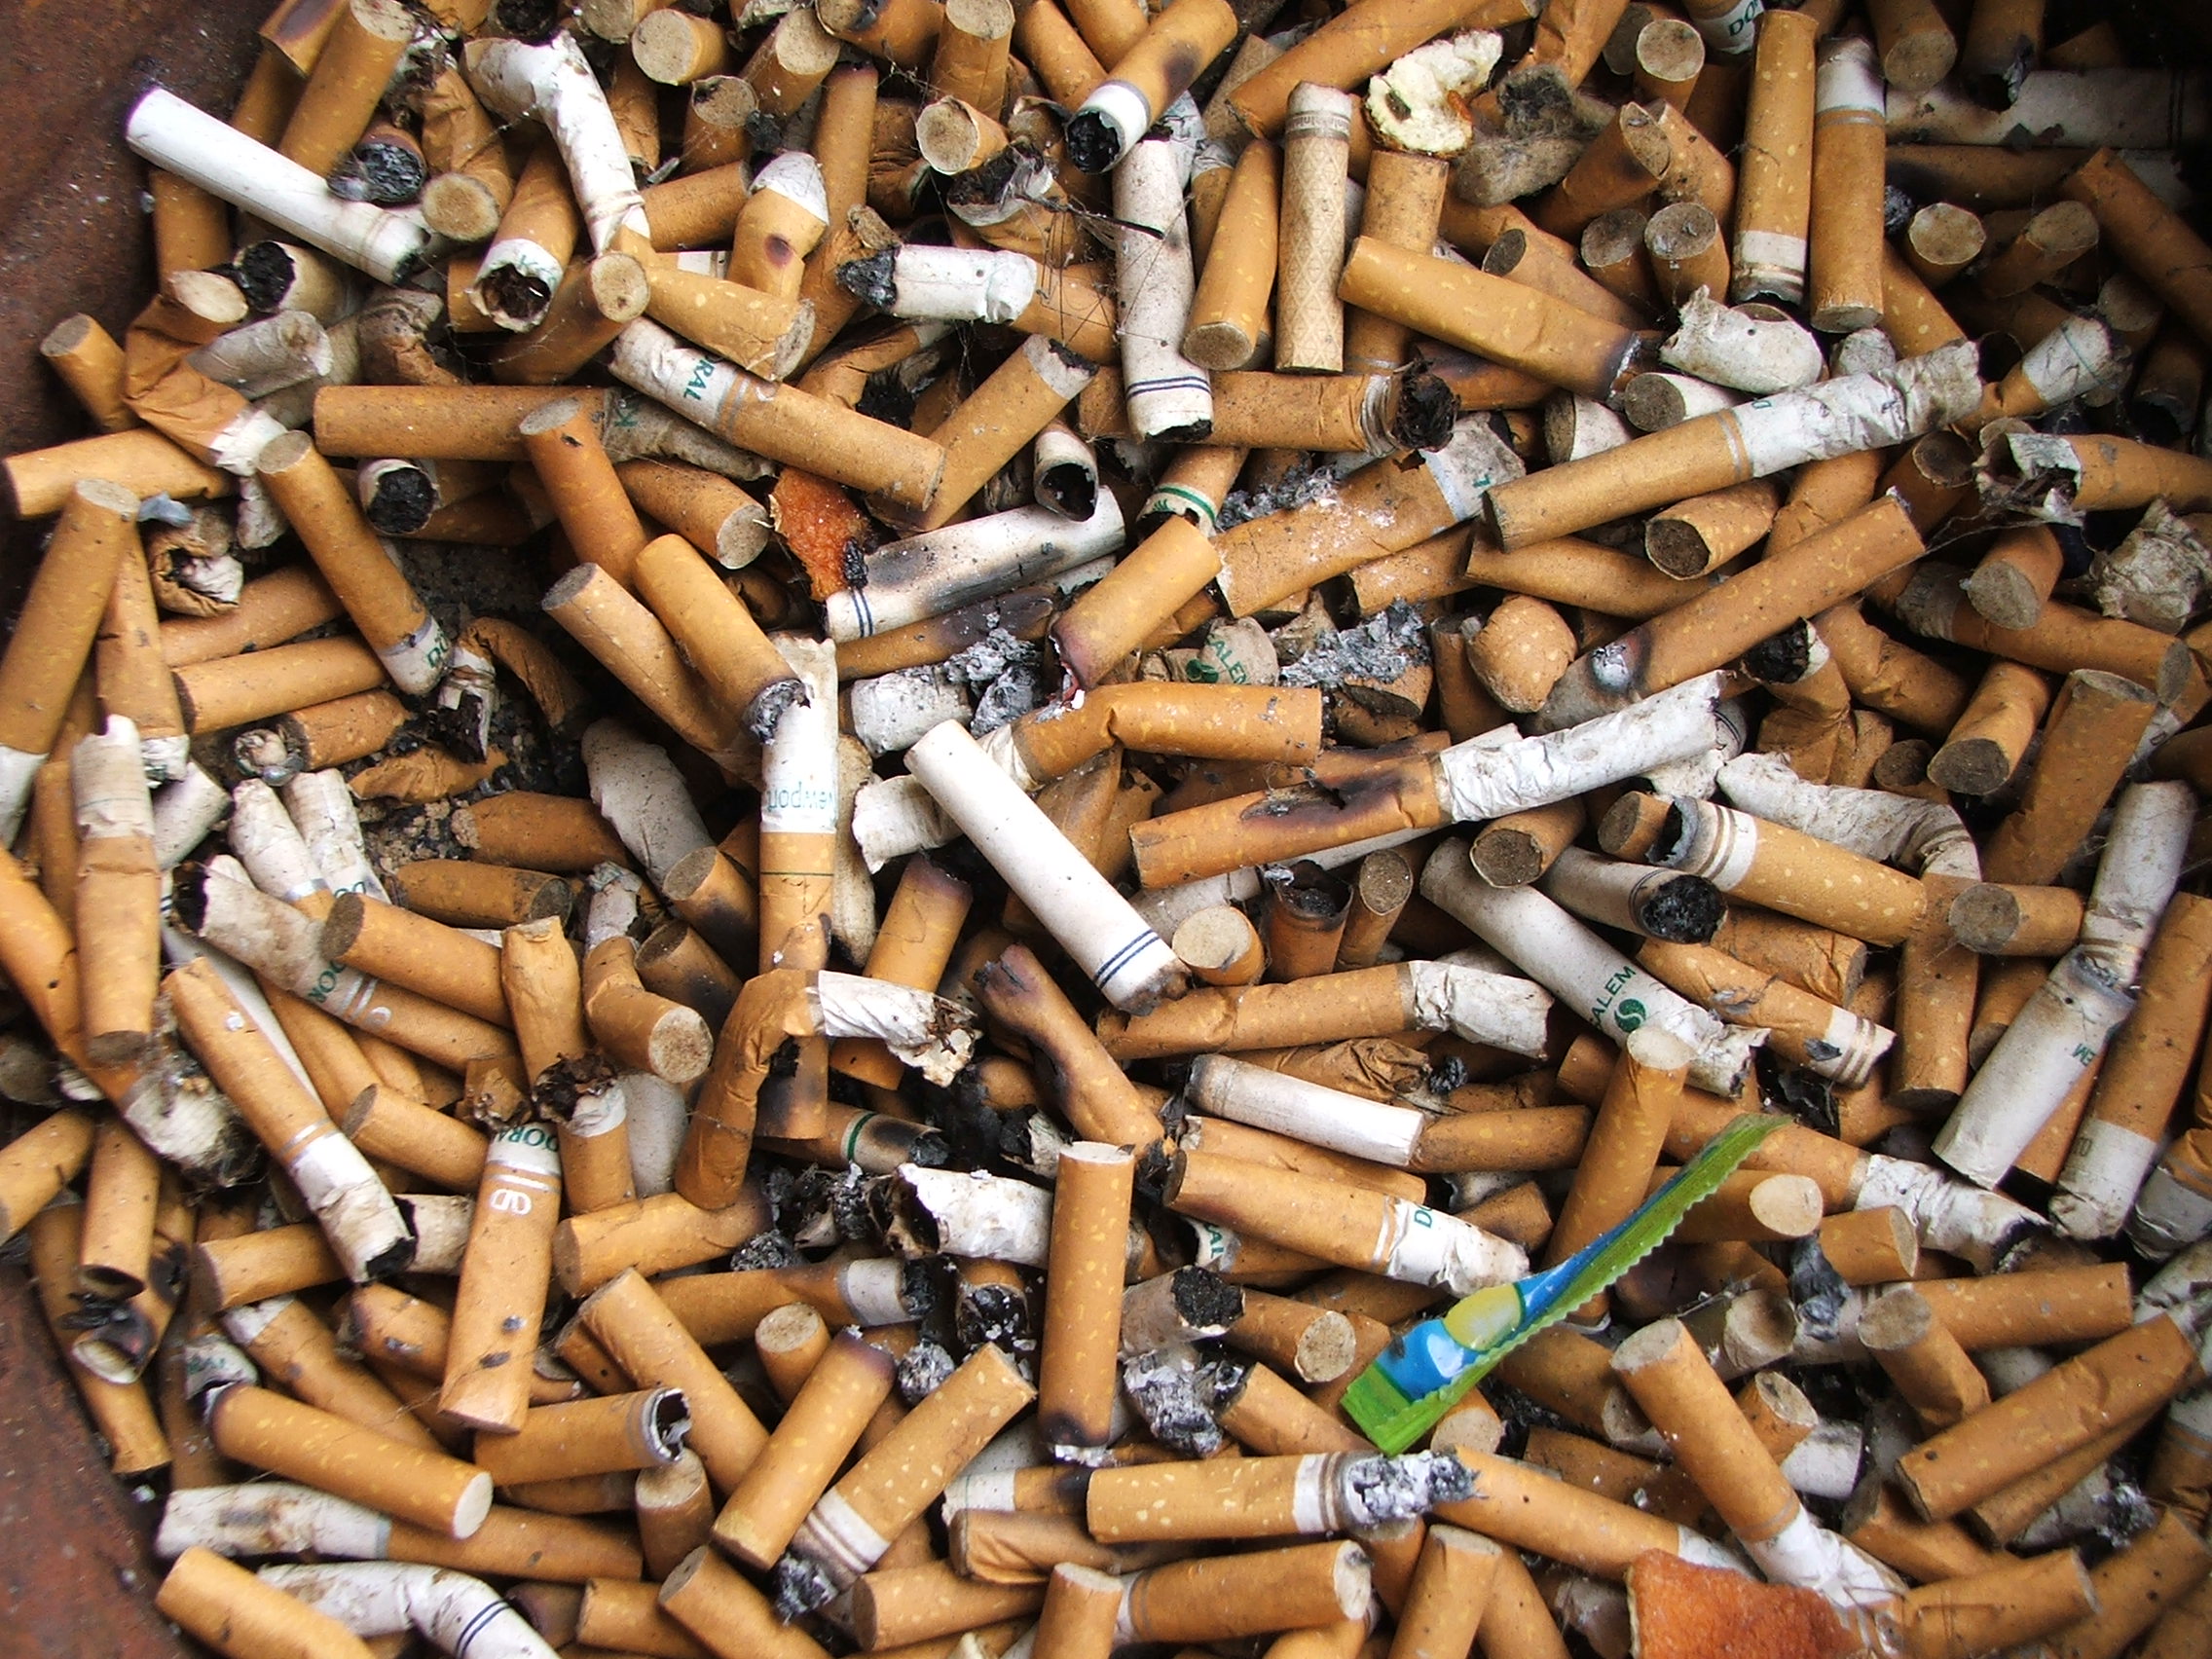 Scientists Say They Can Transform Used Cigarette Filters Into ...